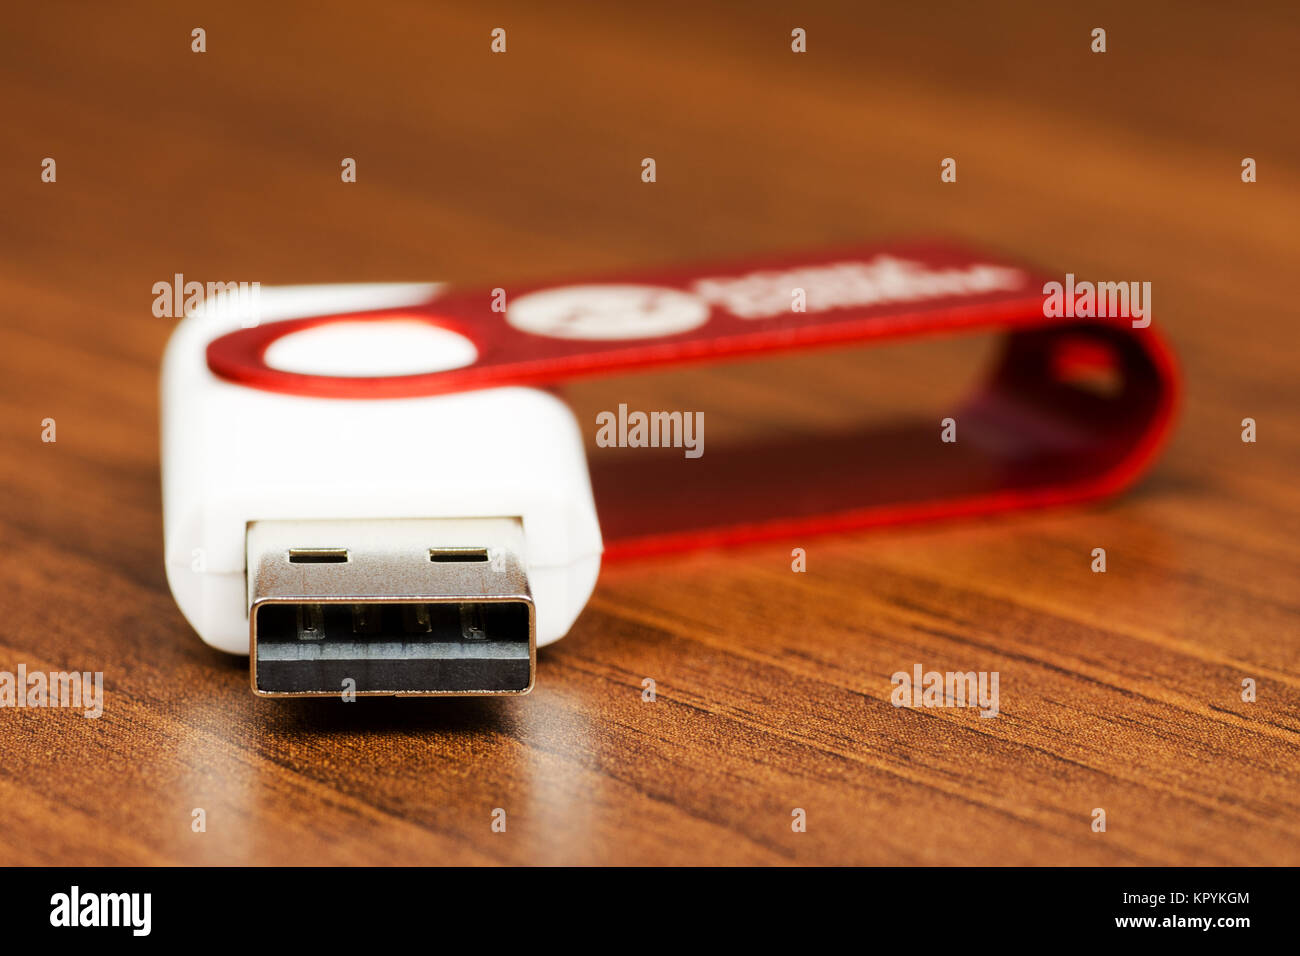 Close-up view of a white USB Flash Drive connector with red cap, on a wooden background Stock Photo